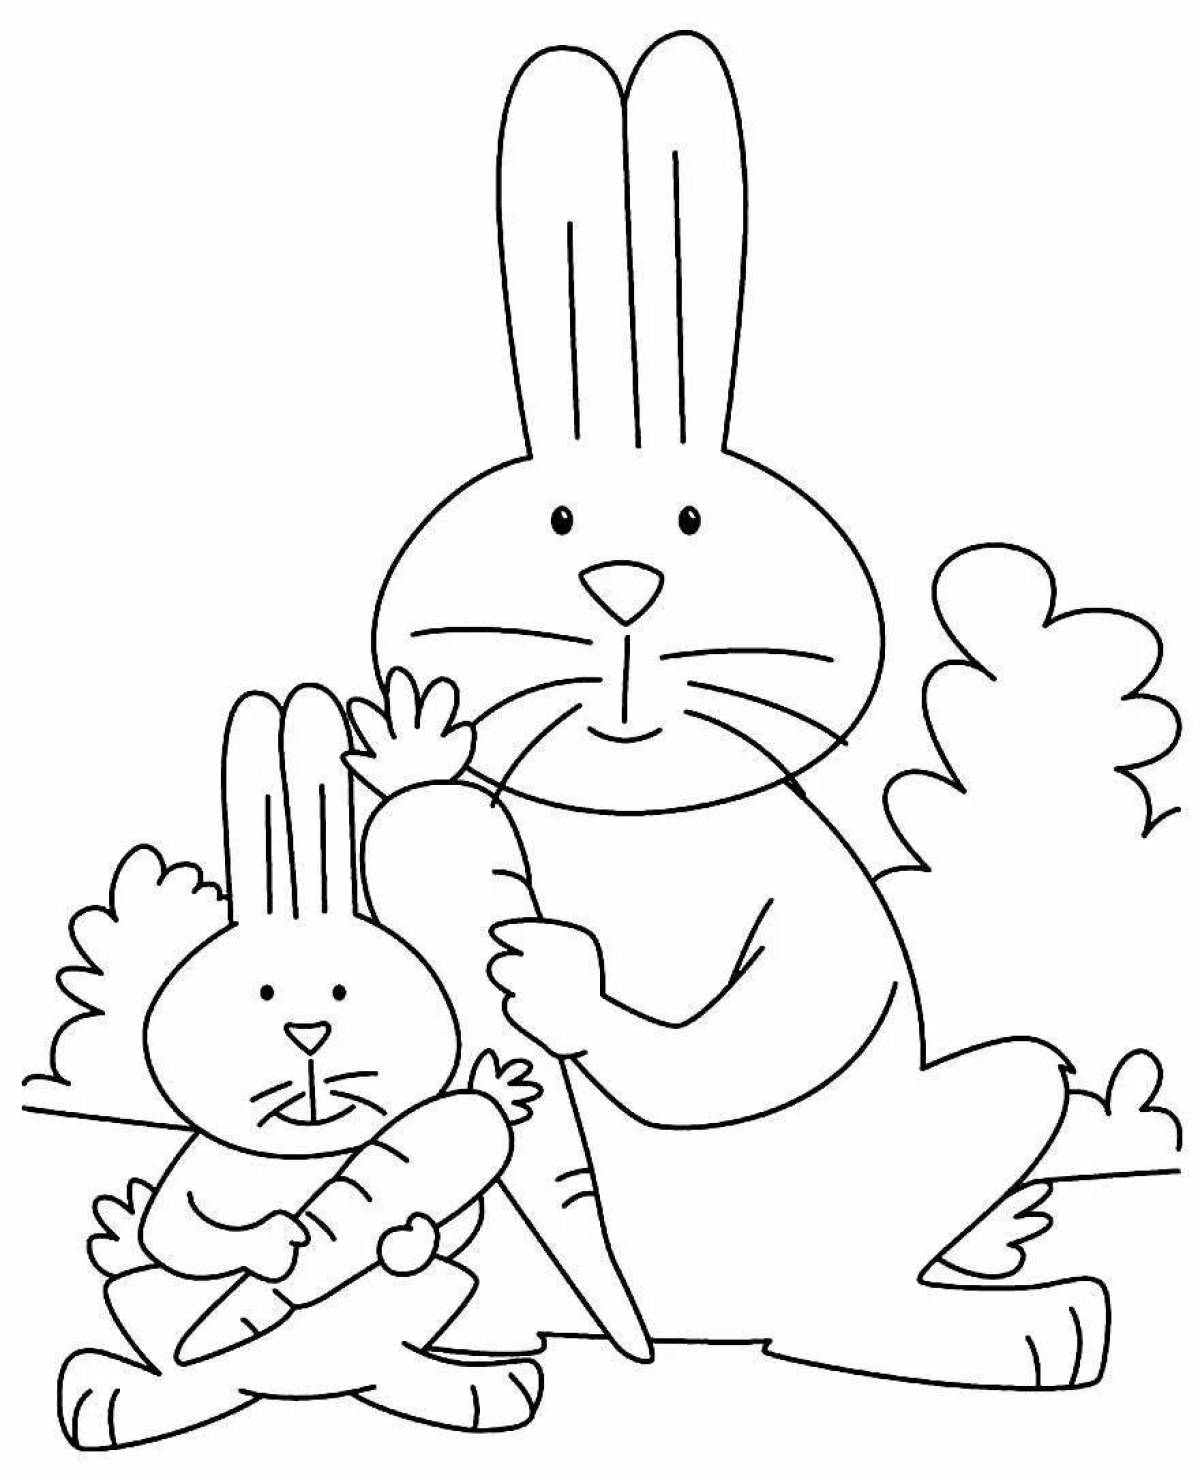 Coloring page fluffy rabbit and cat